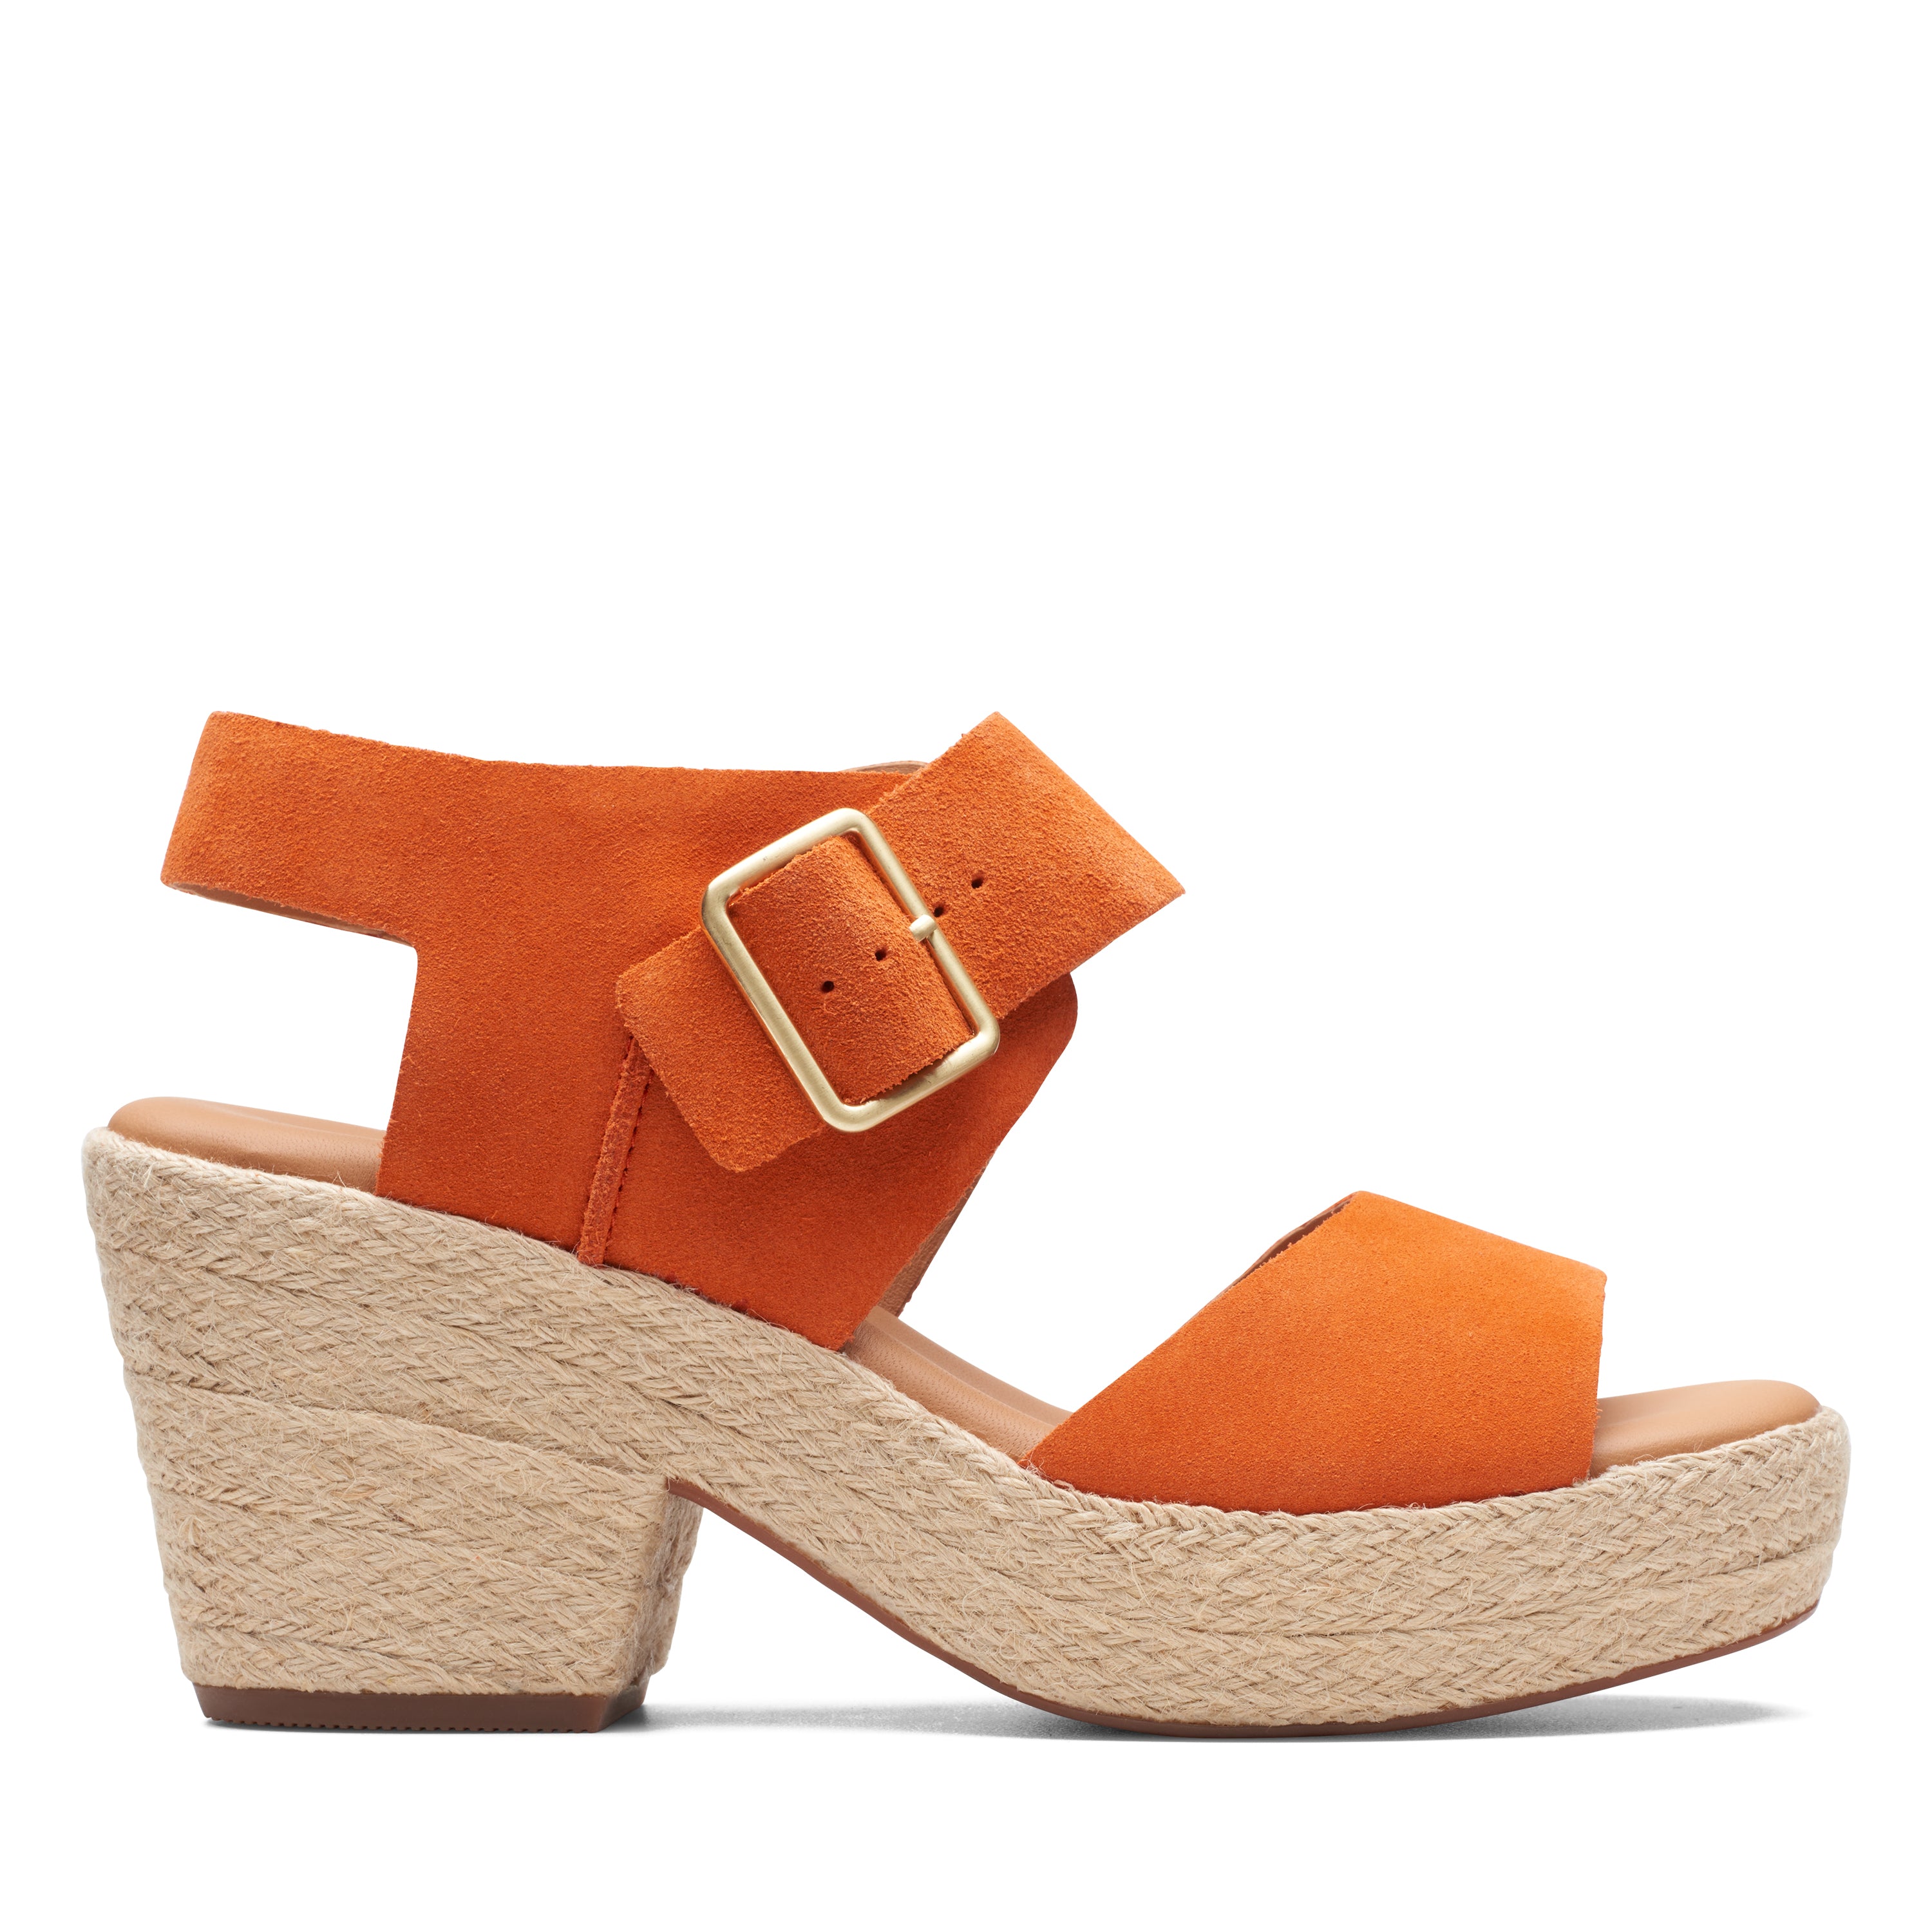 Wedges - Buy Wedges for Women Online | Mochi Shoes